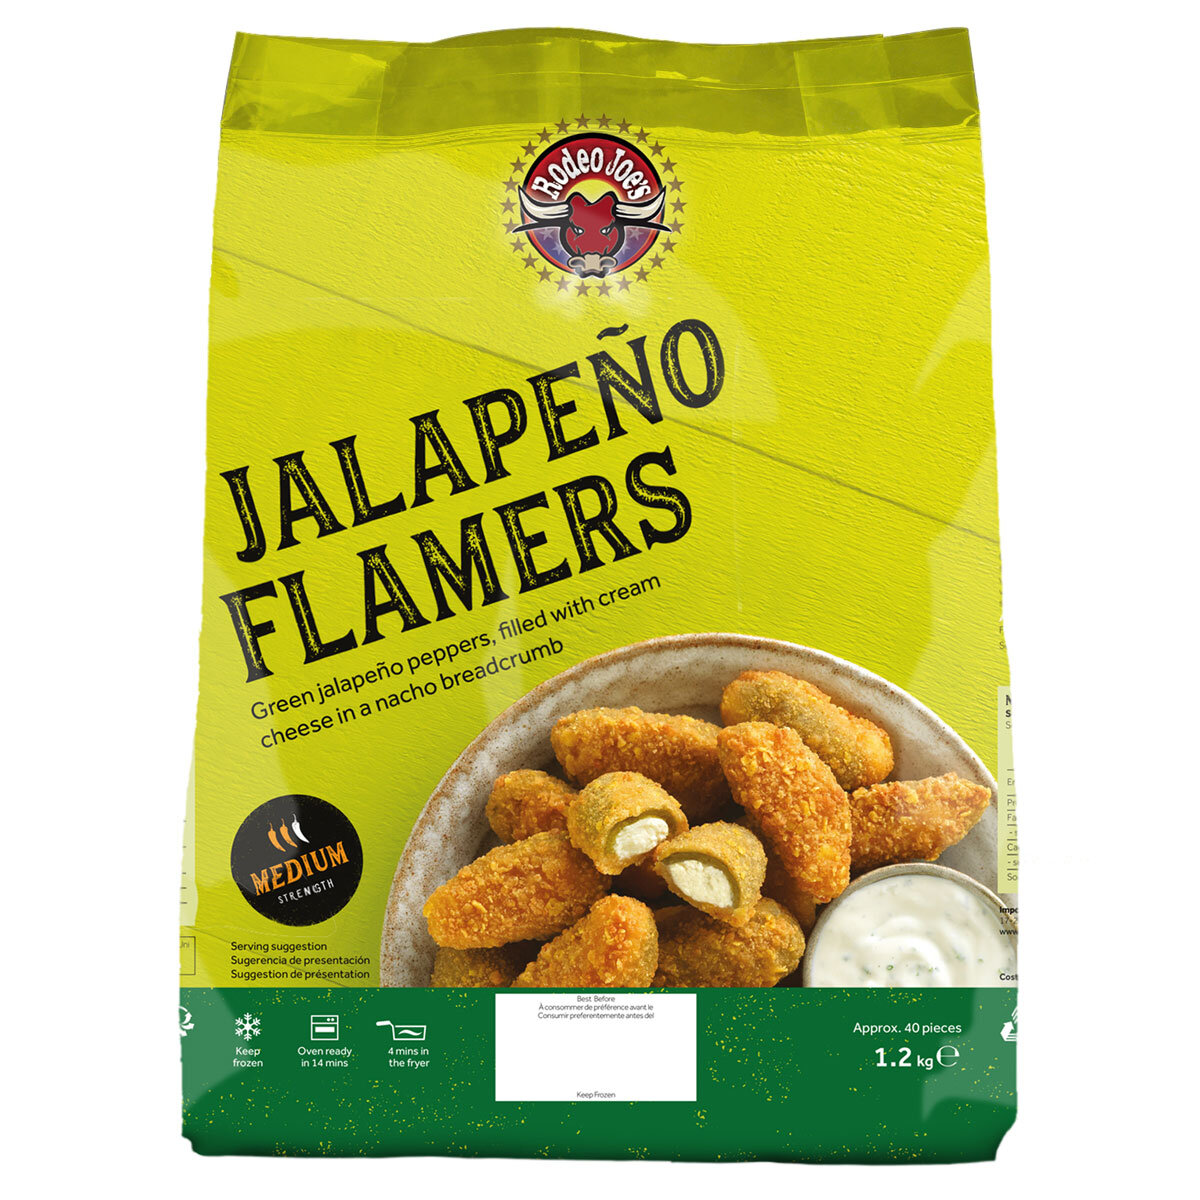 Rodeo Joes Jalepeno Flamers bag